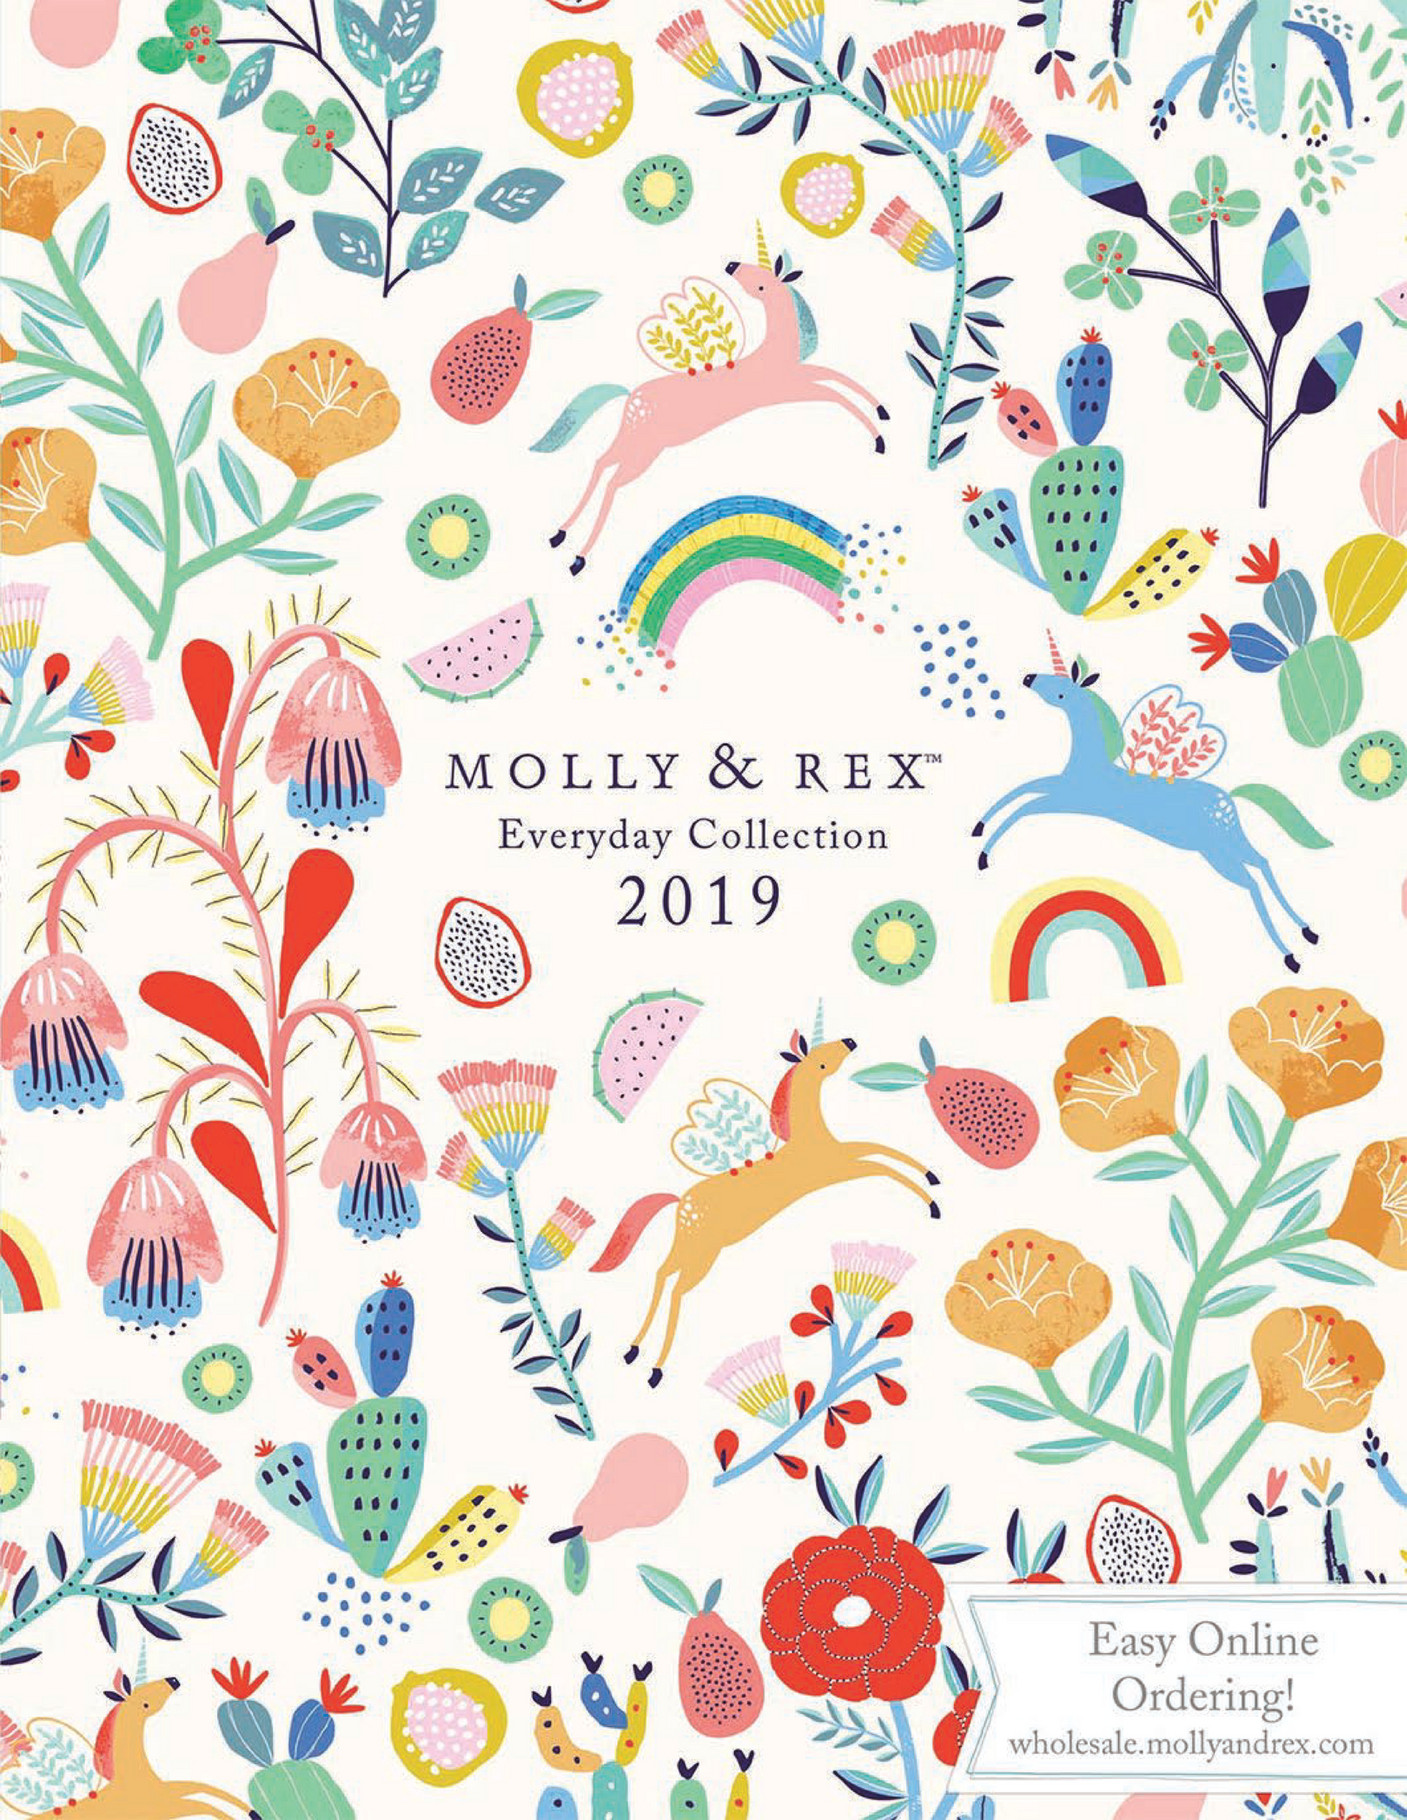 home-molly-rex-stationery-gift